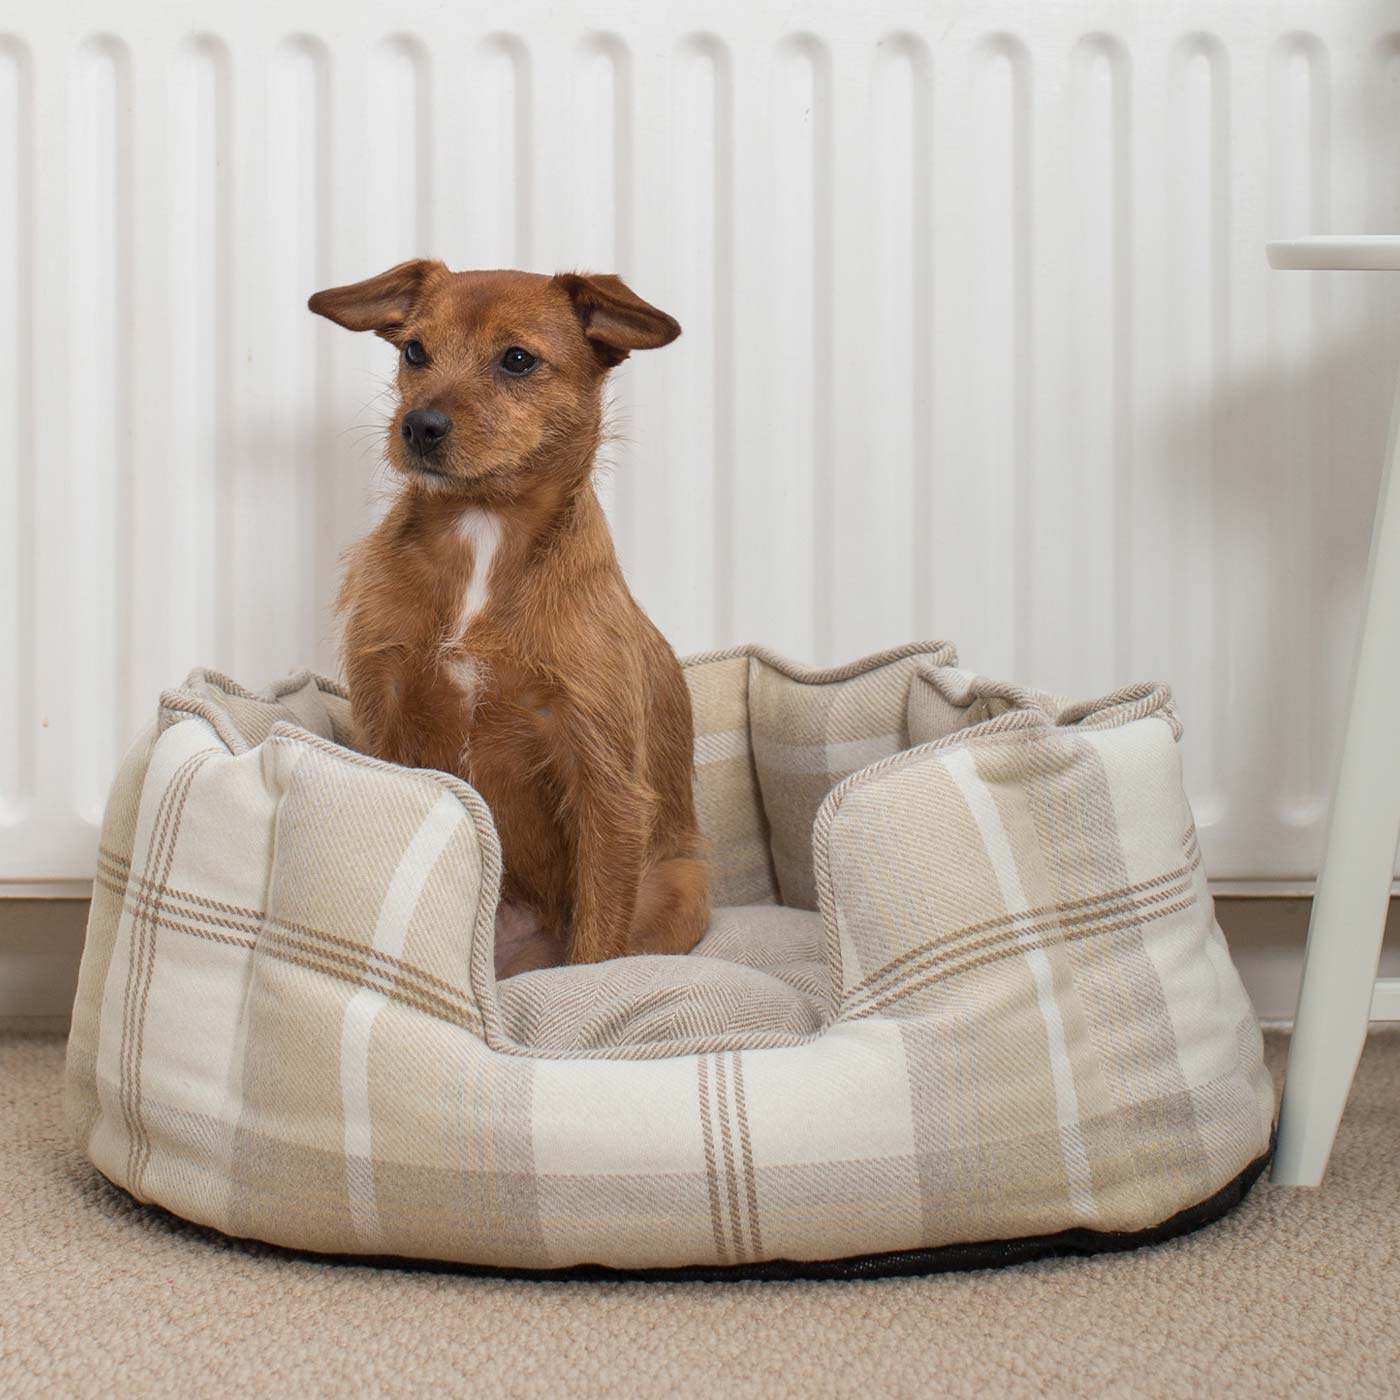 Discover Our Luxurious High Wall Bed For Dogs, Featuring inner pillow with plush teddy fleece on one side To Craft The Perfect Dogs Bed In Stunning Neutral Tweed! Available To Personalise Now at Lords & Labradors 